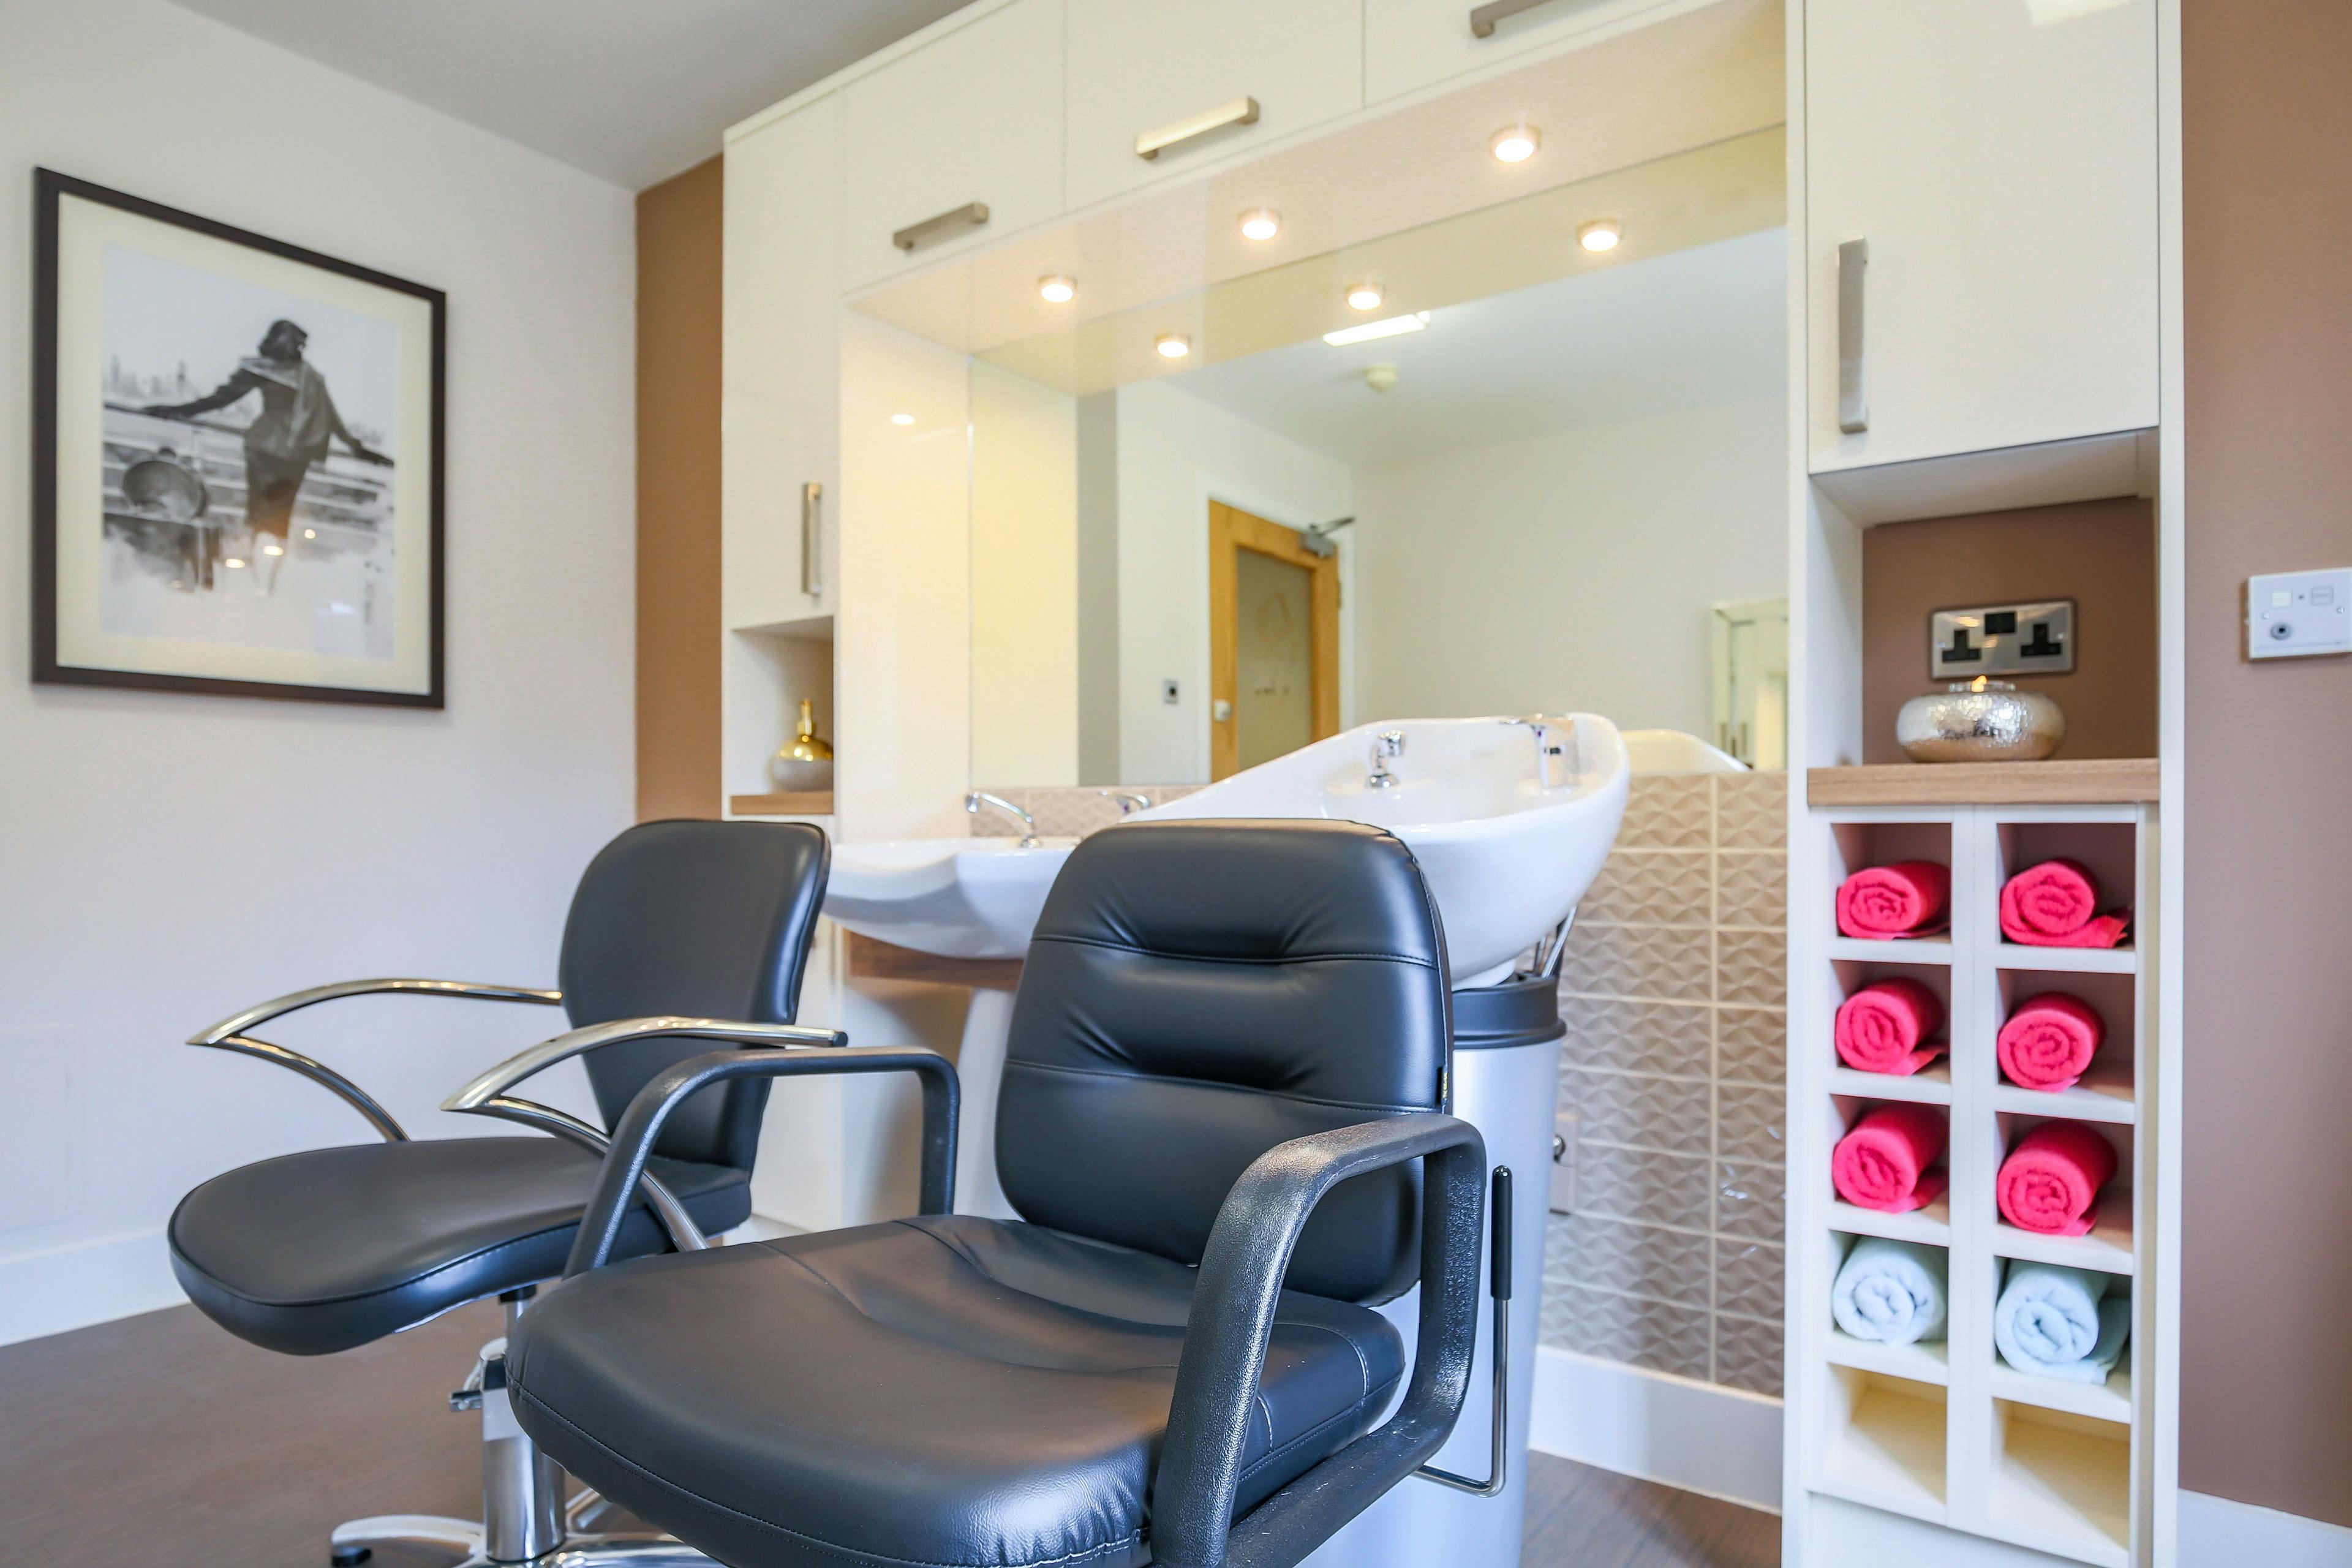 Salon at Park View Care Home in Barking and Dagenham, Greater London